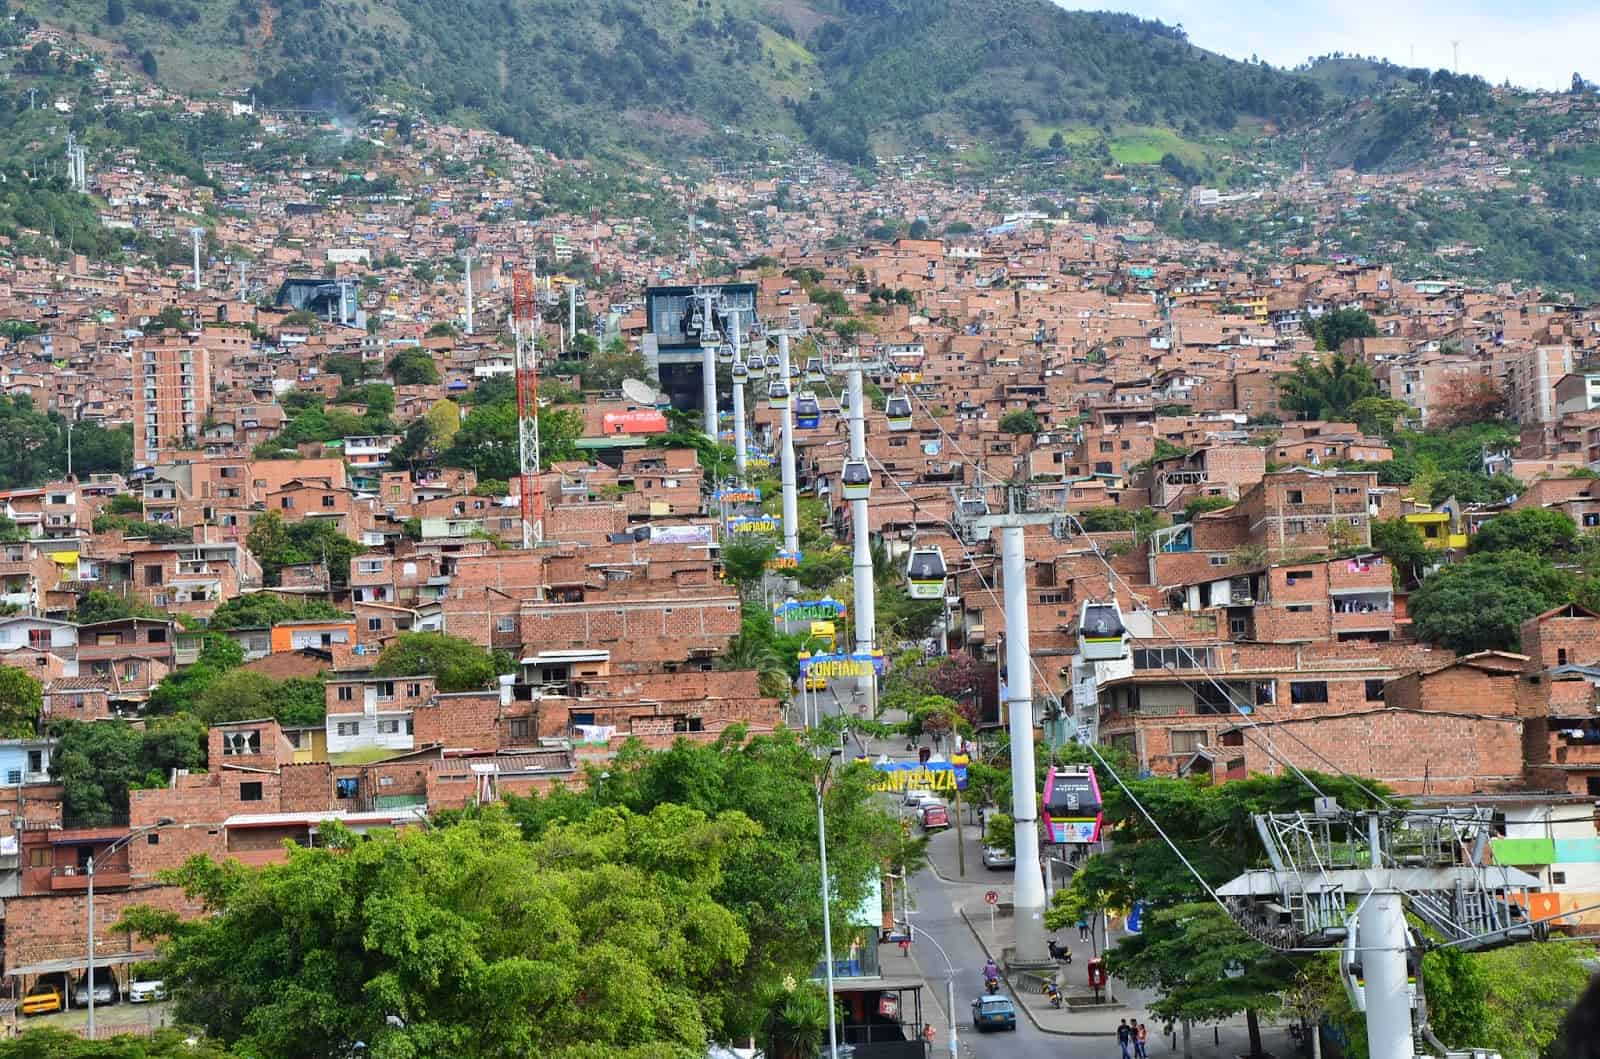 Metrocable Line K in Medellín, Antioquia, Colombia